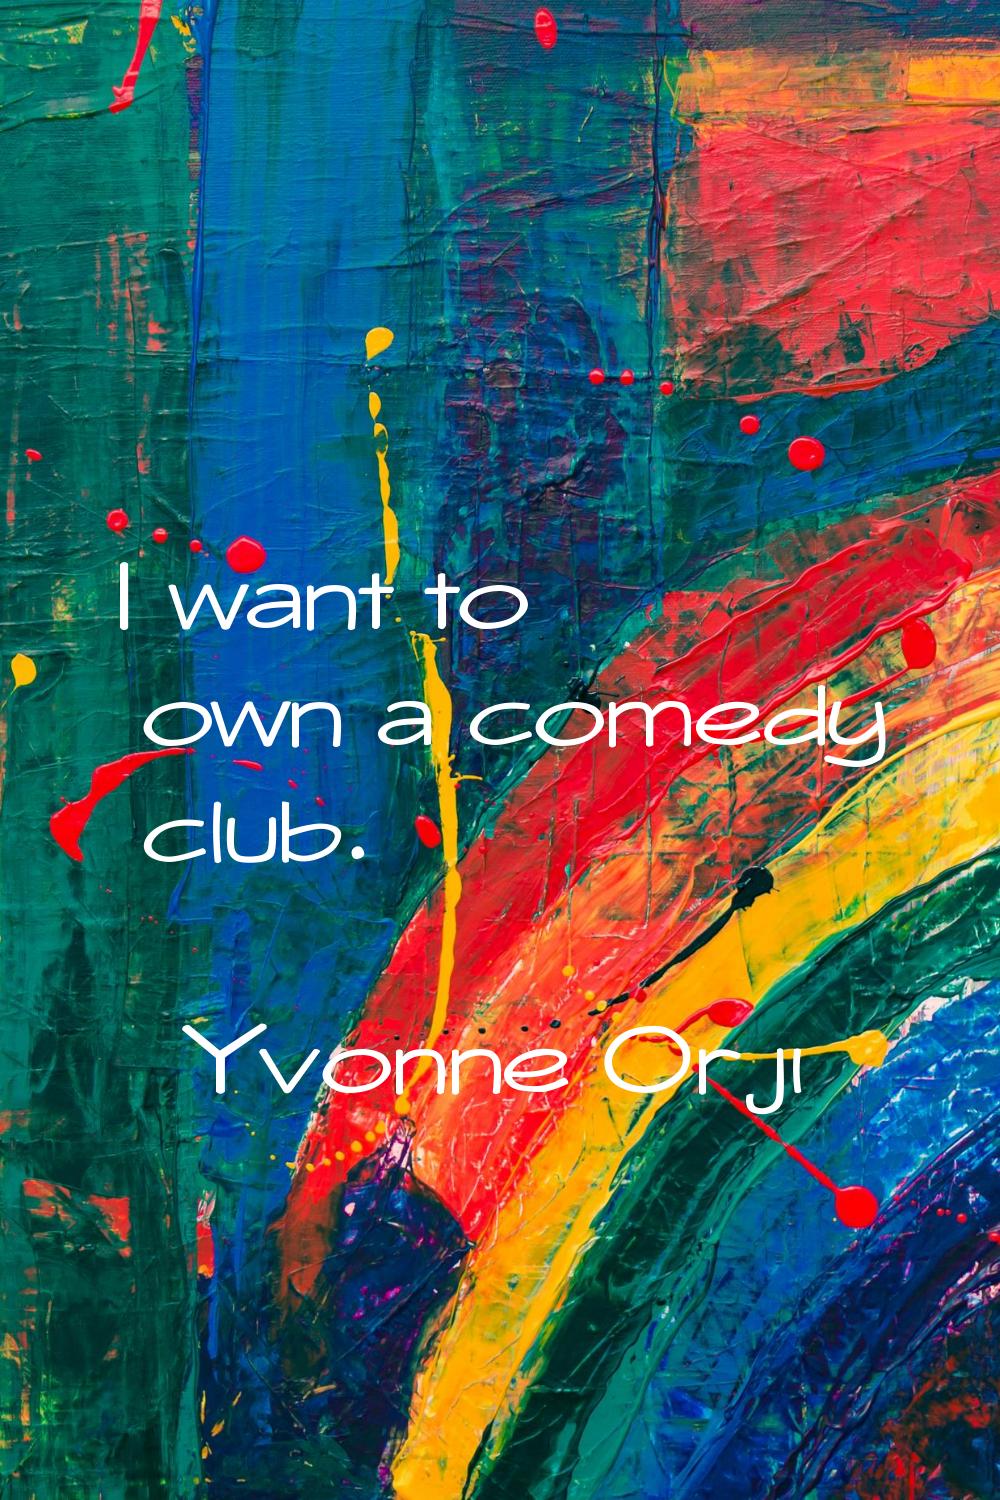 I want to own a comedy club.